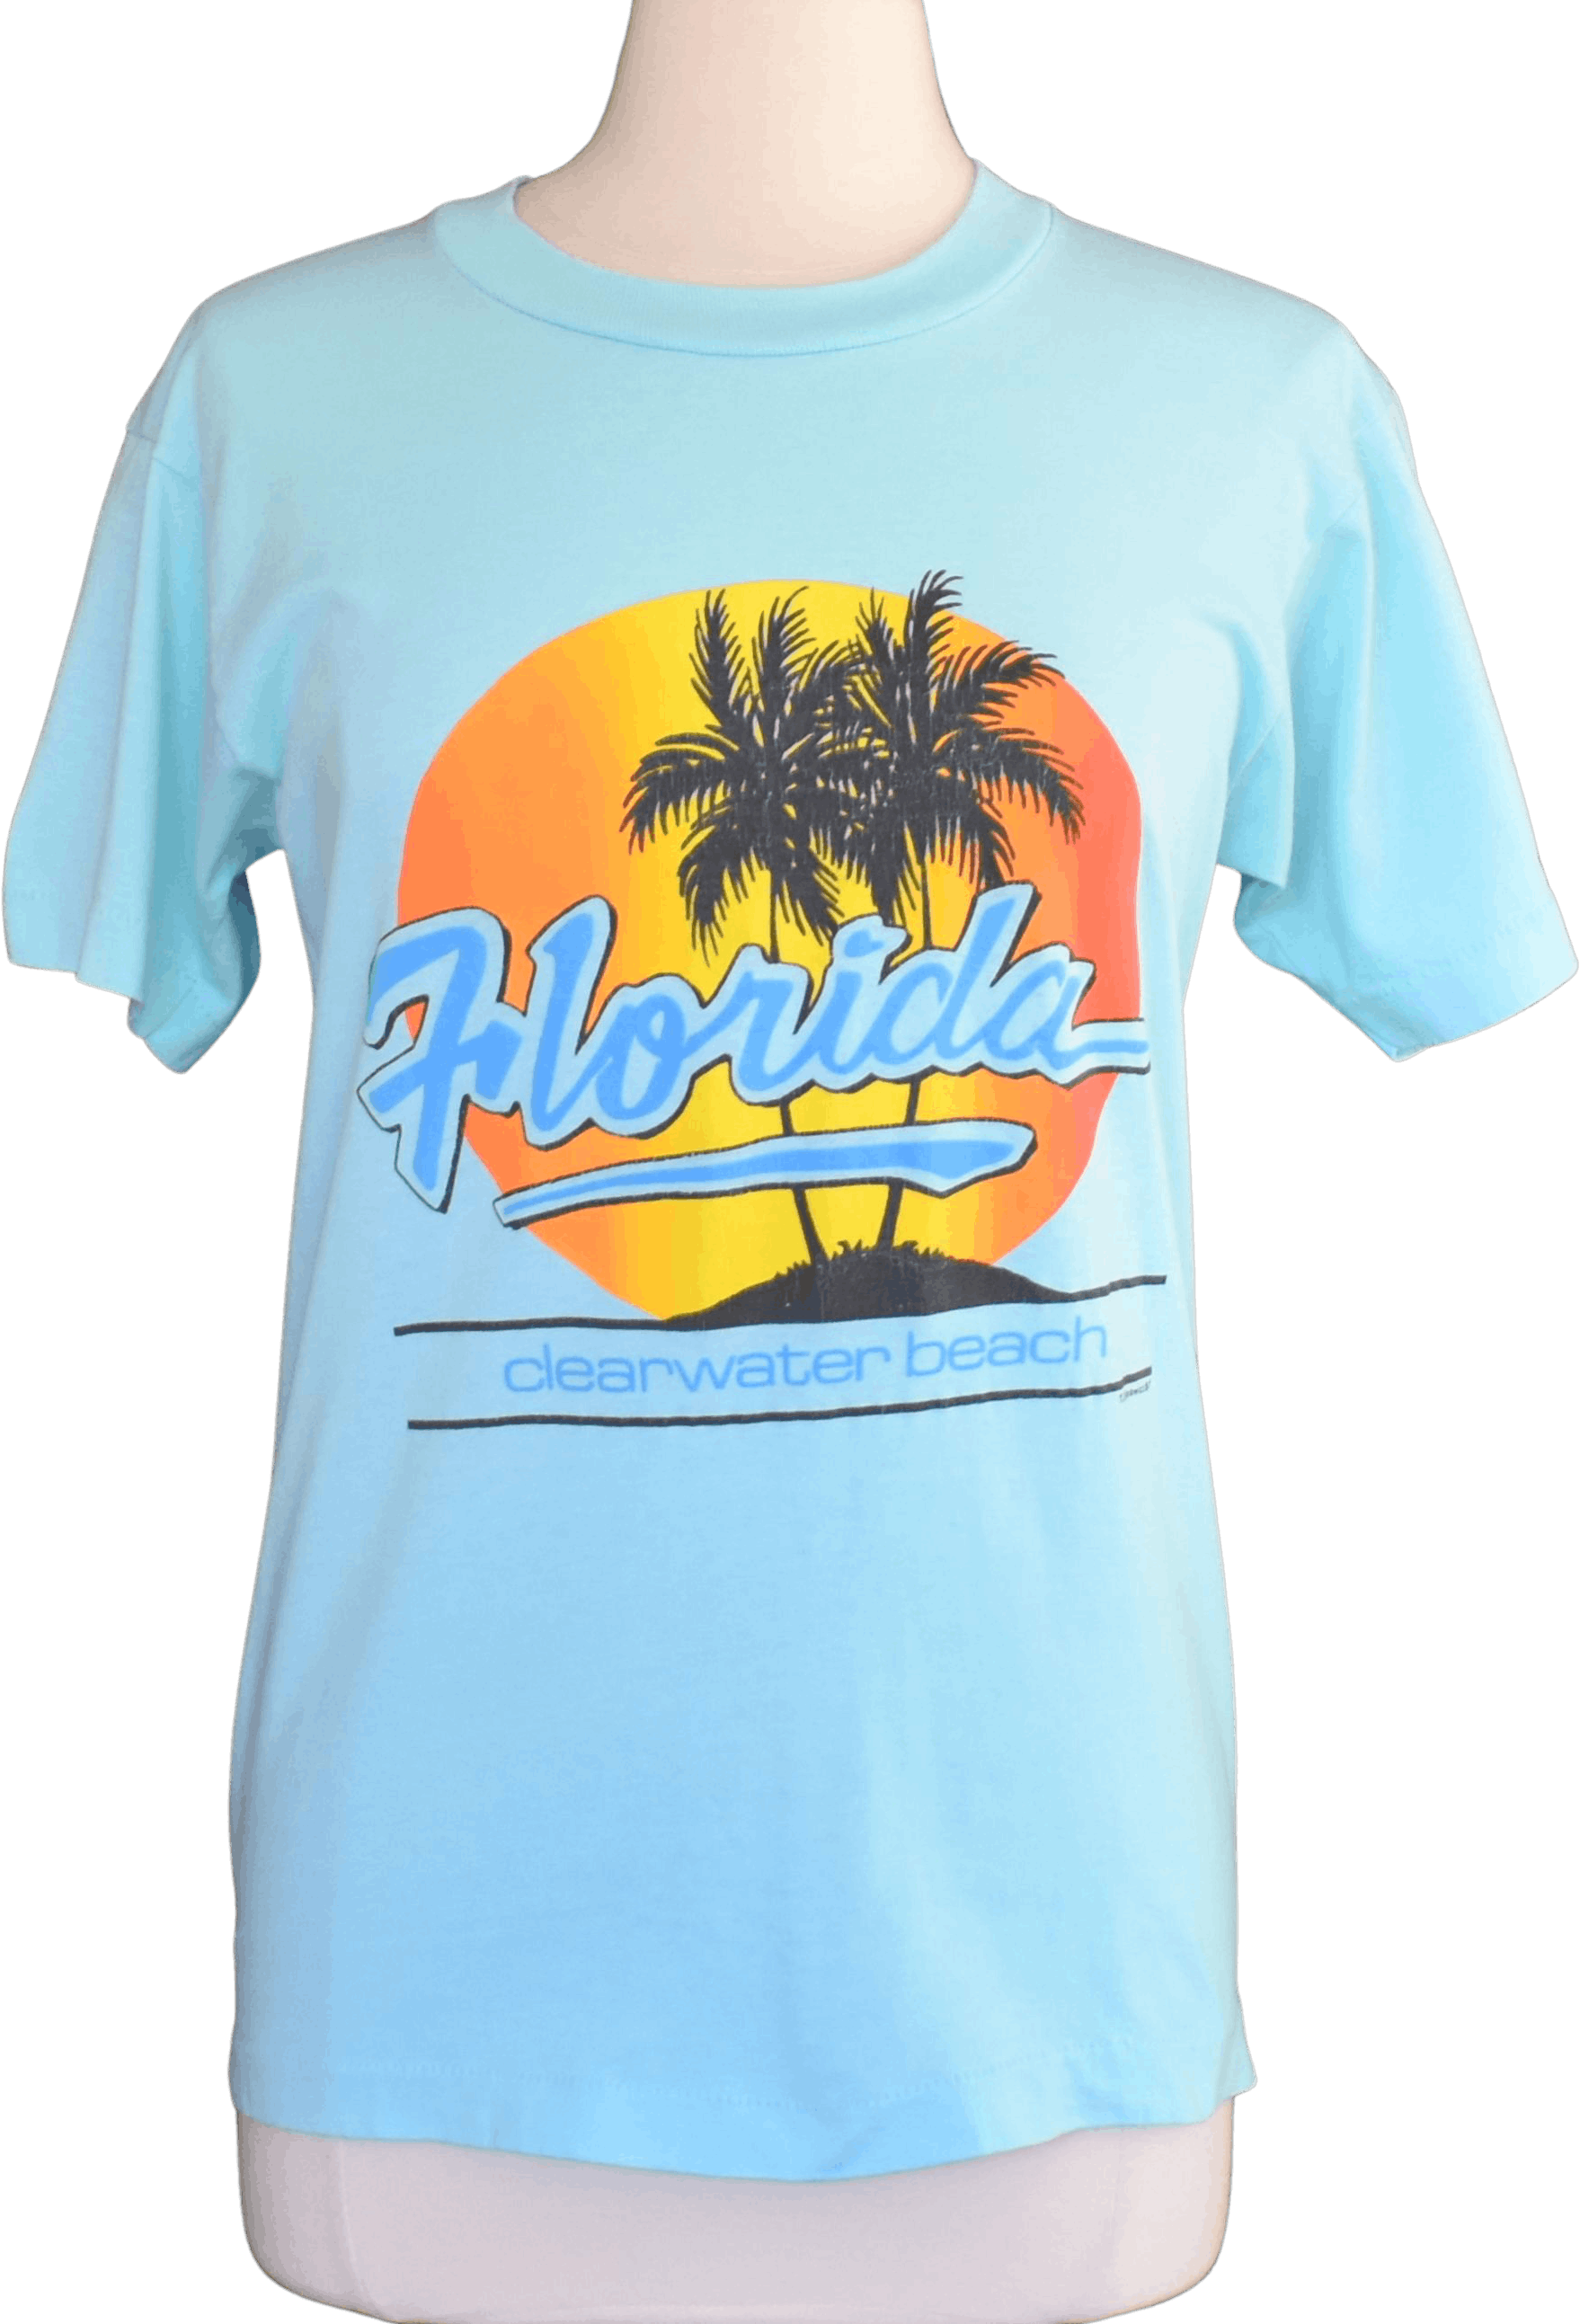 Vintage 80's Clearwater Beach Florida Tee | Shop THRILLING